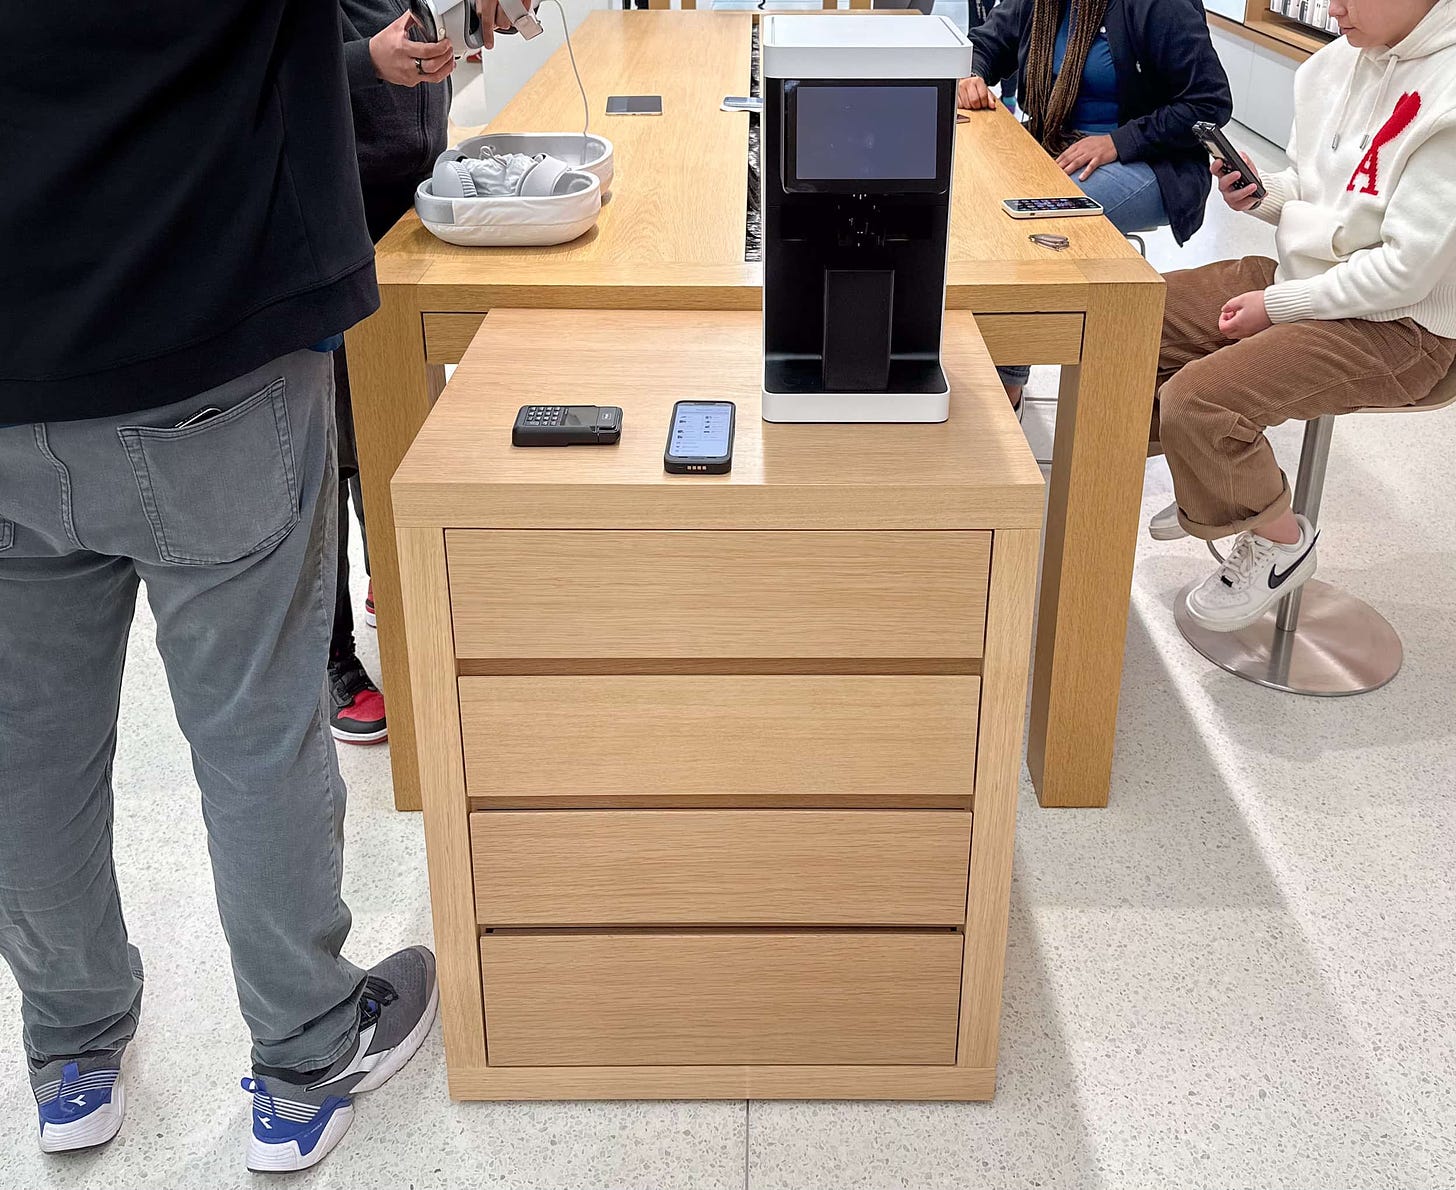 An Apple Vision Pro accessory cabinet and lens scanning machine placed at the end of an Apple Store table.